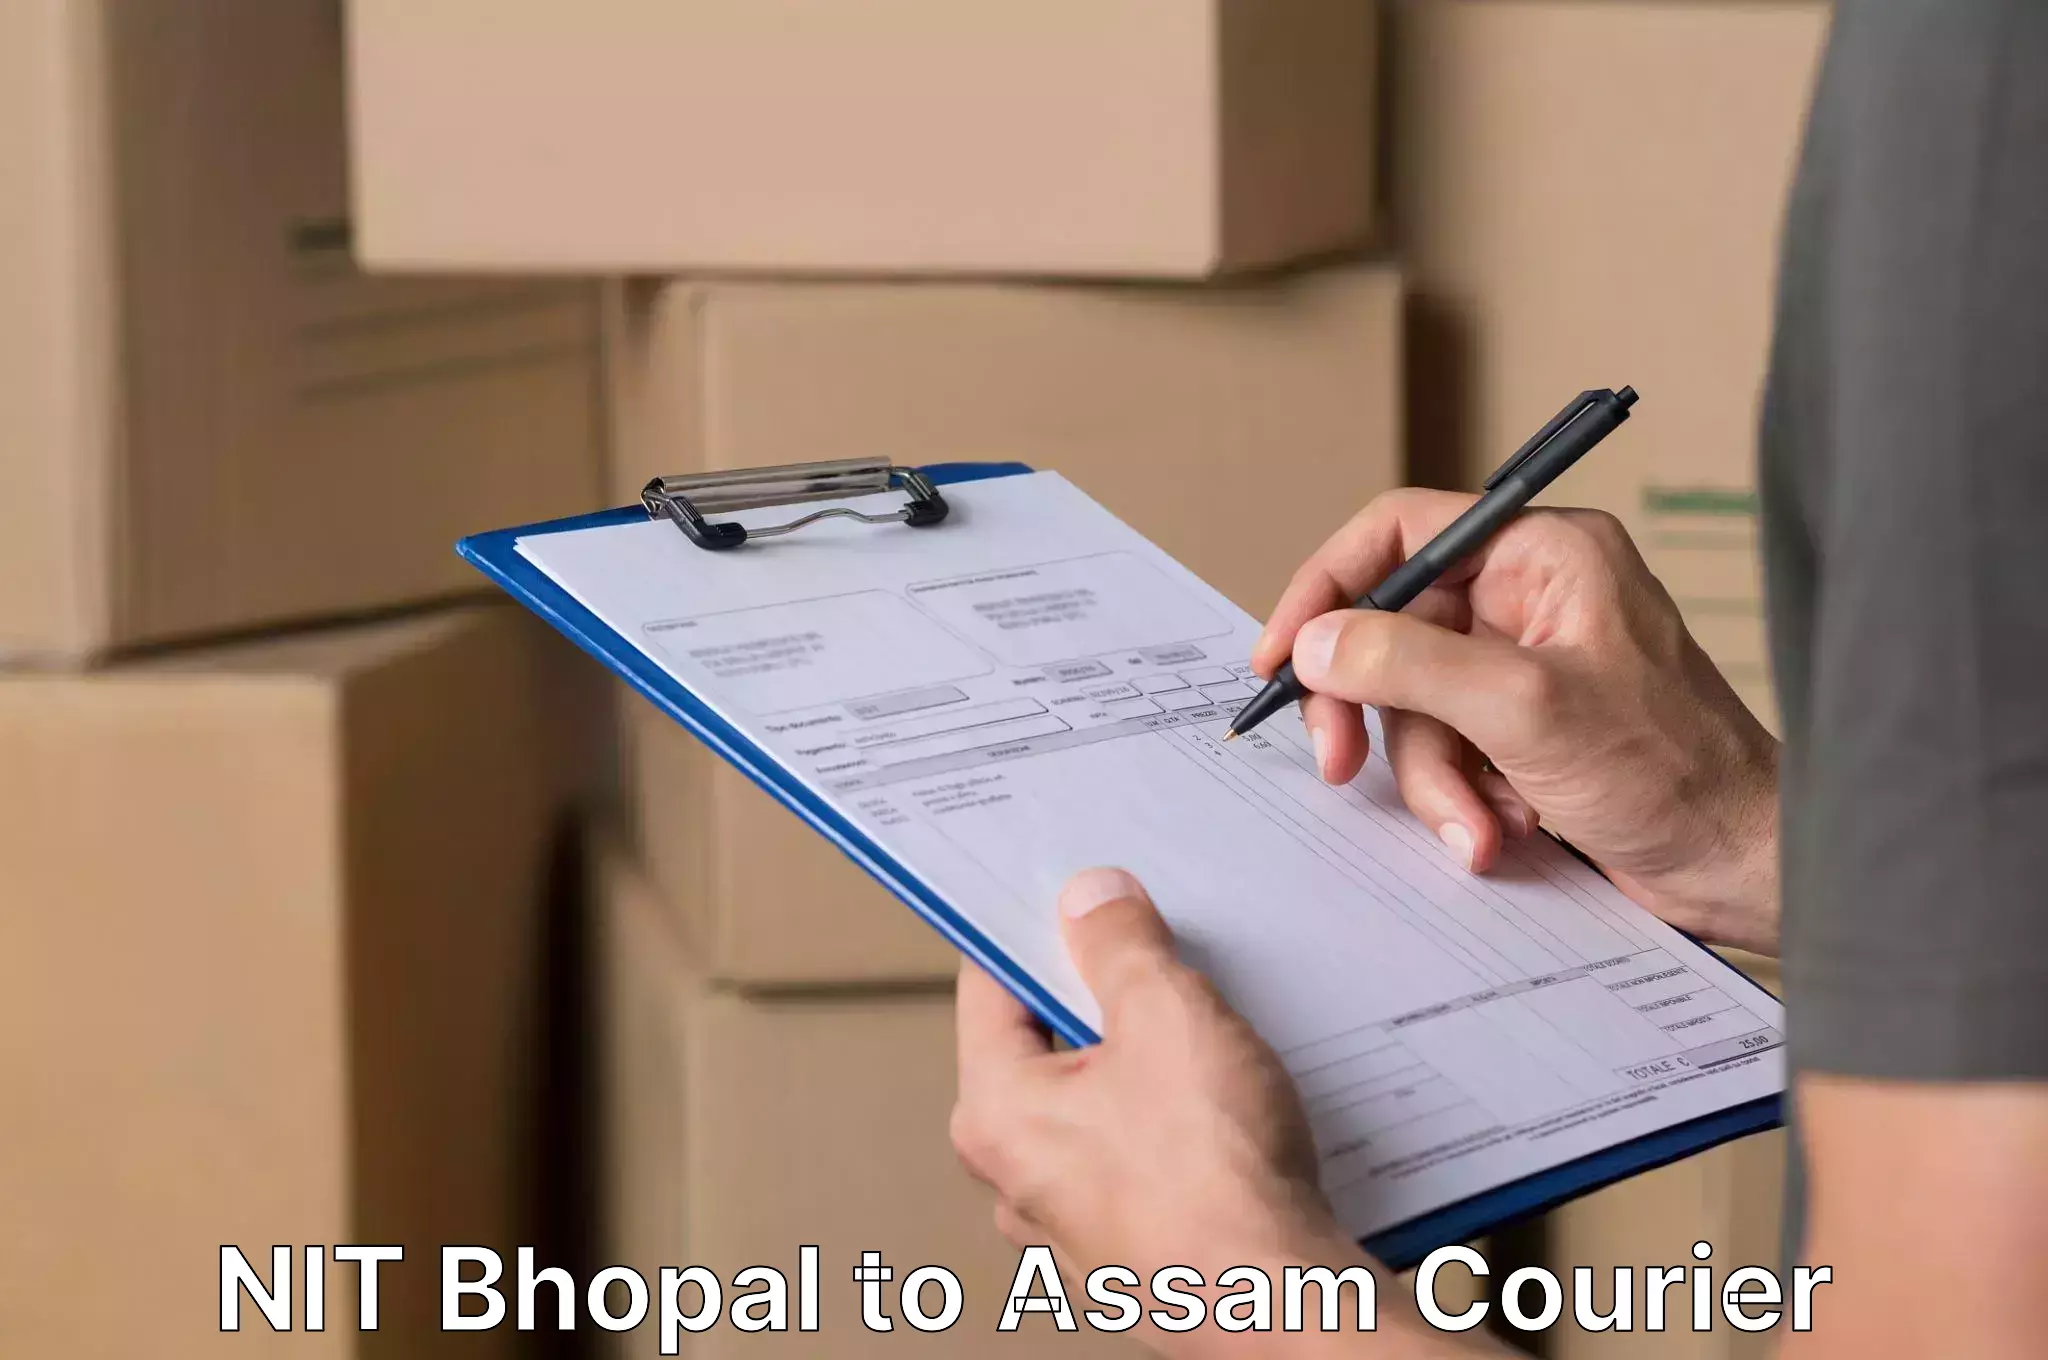 Hassle-free relocation NIT Bhopal to Bhaga